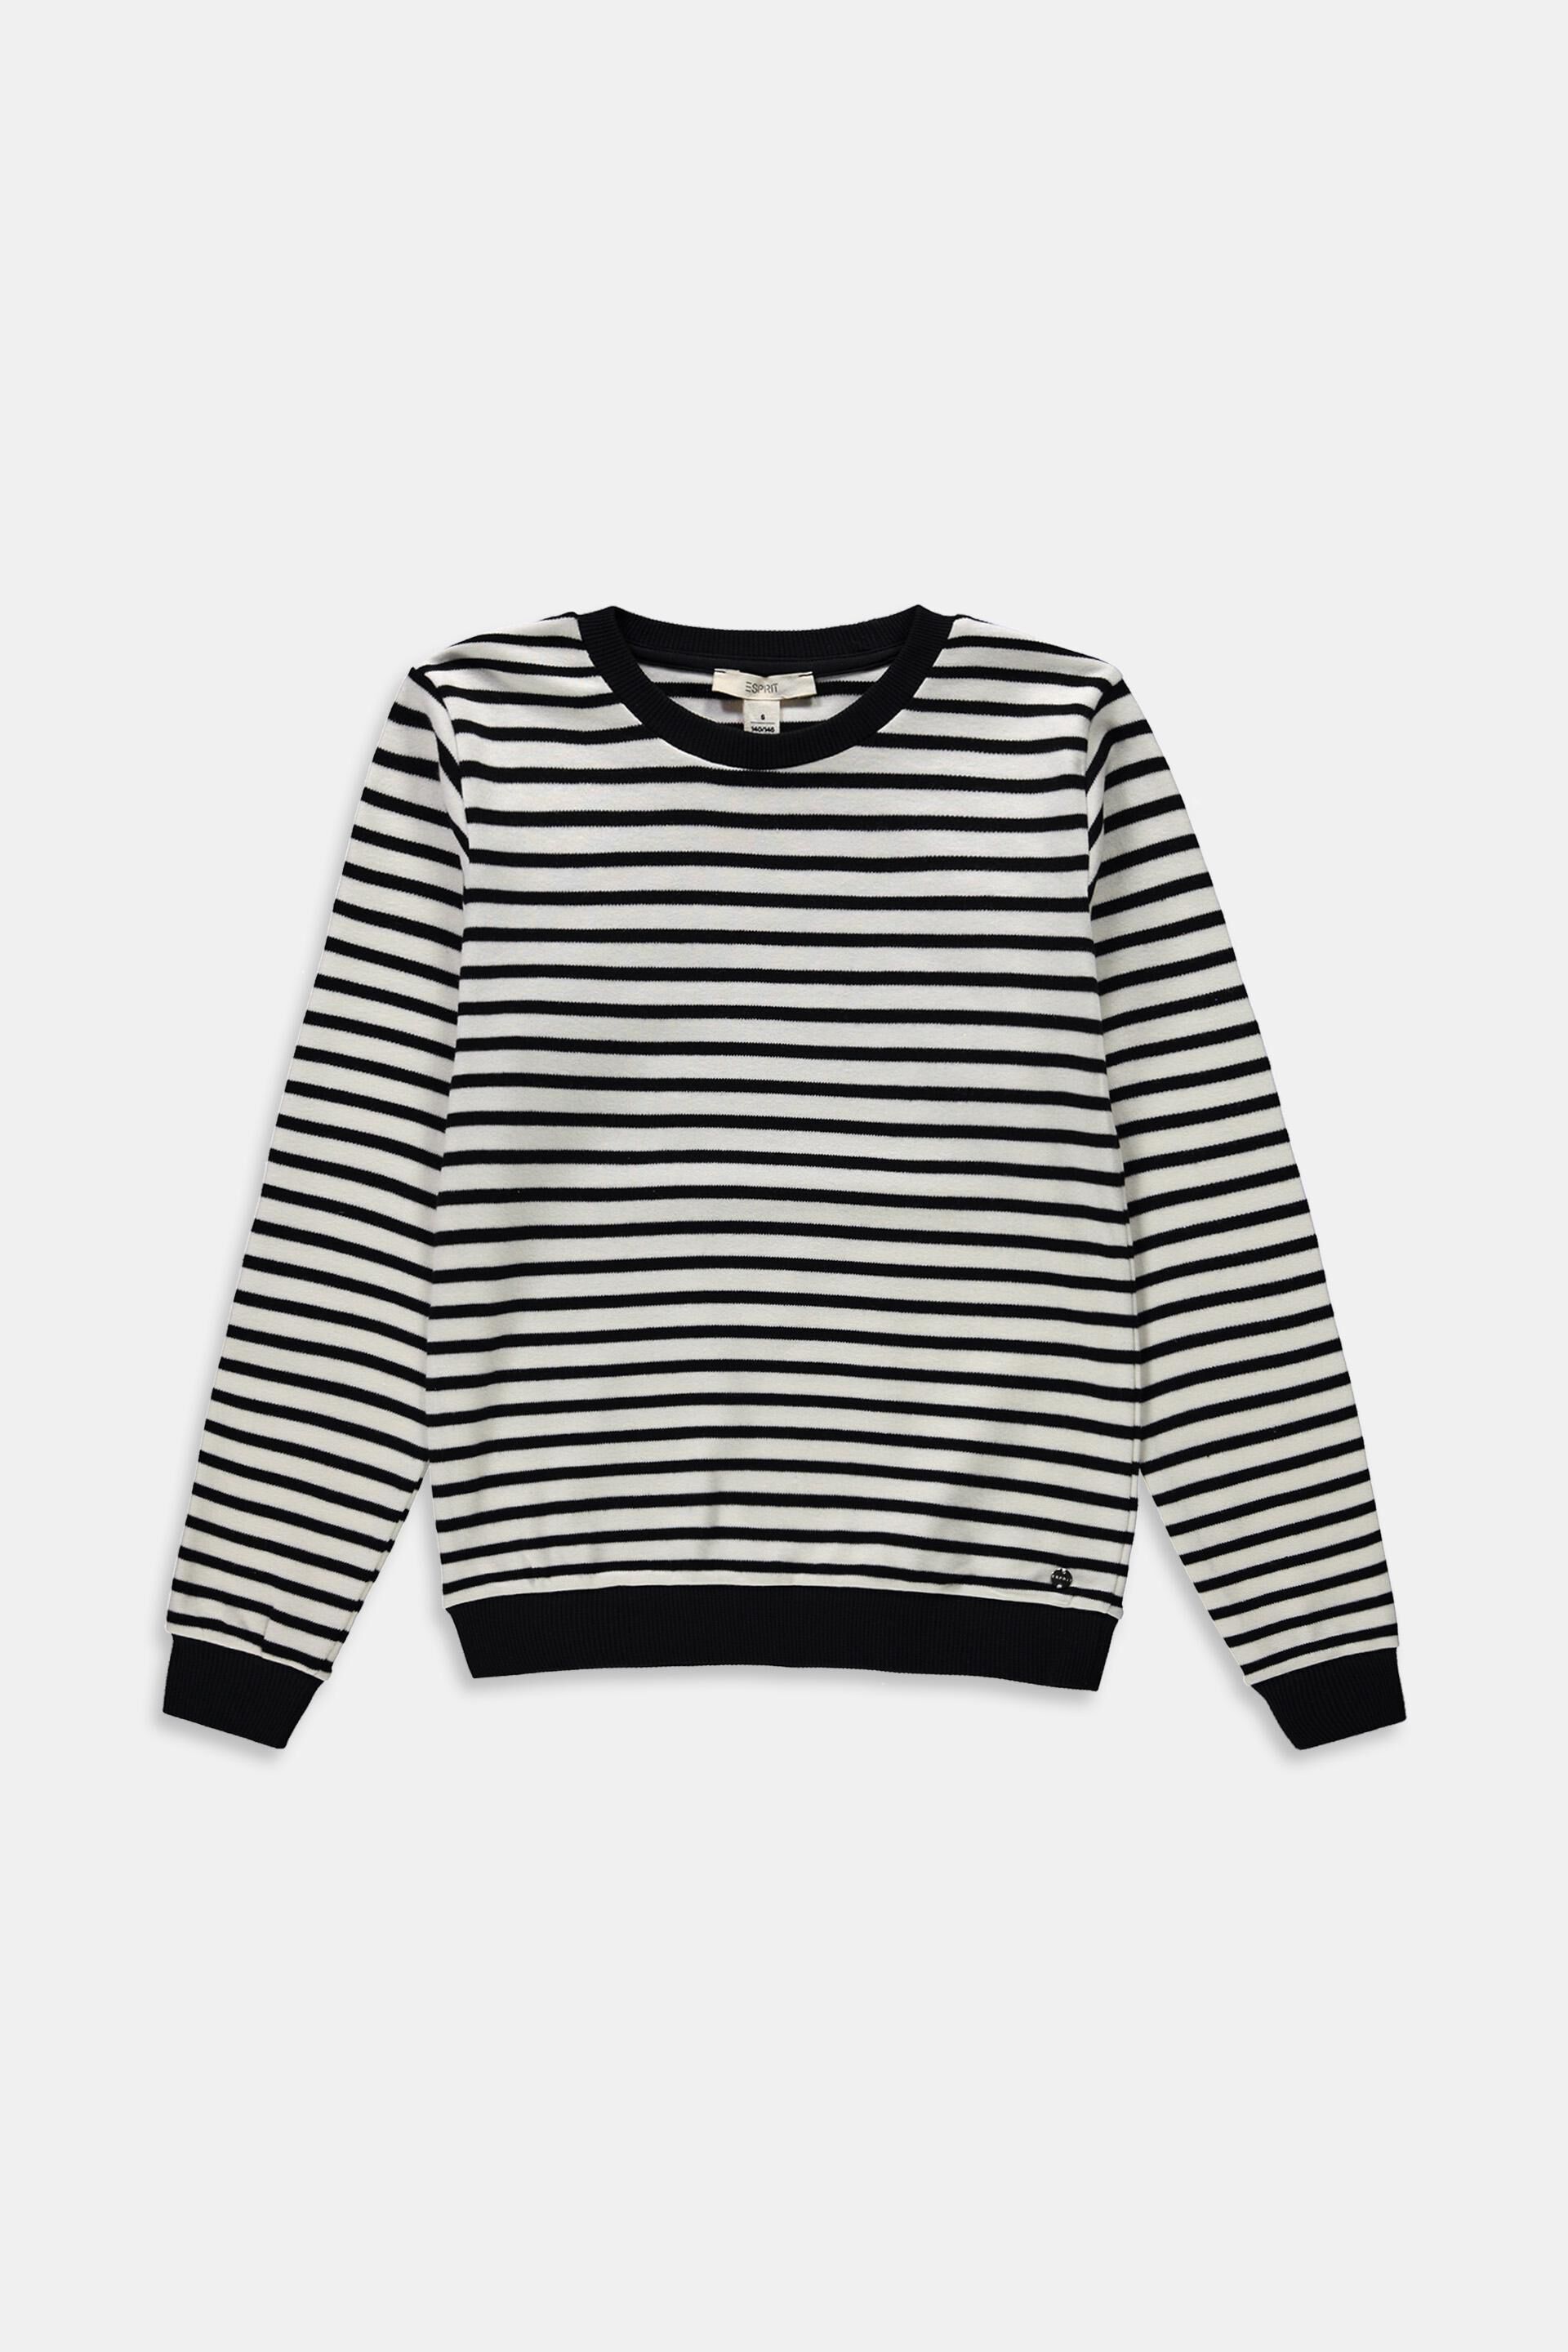 Esprit top Striped long-sleeved